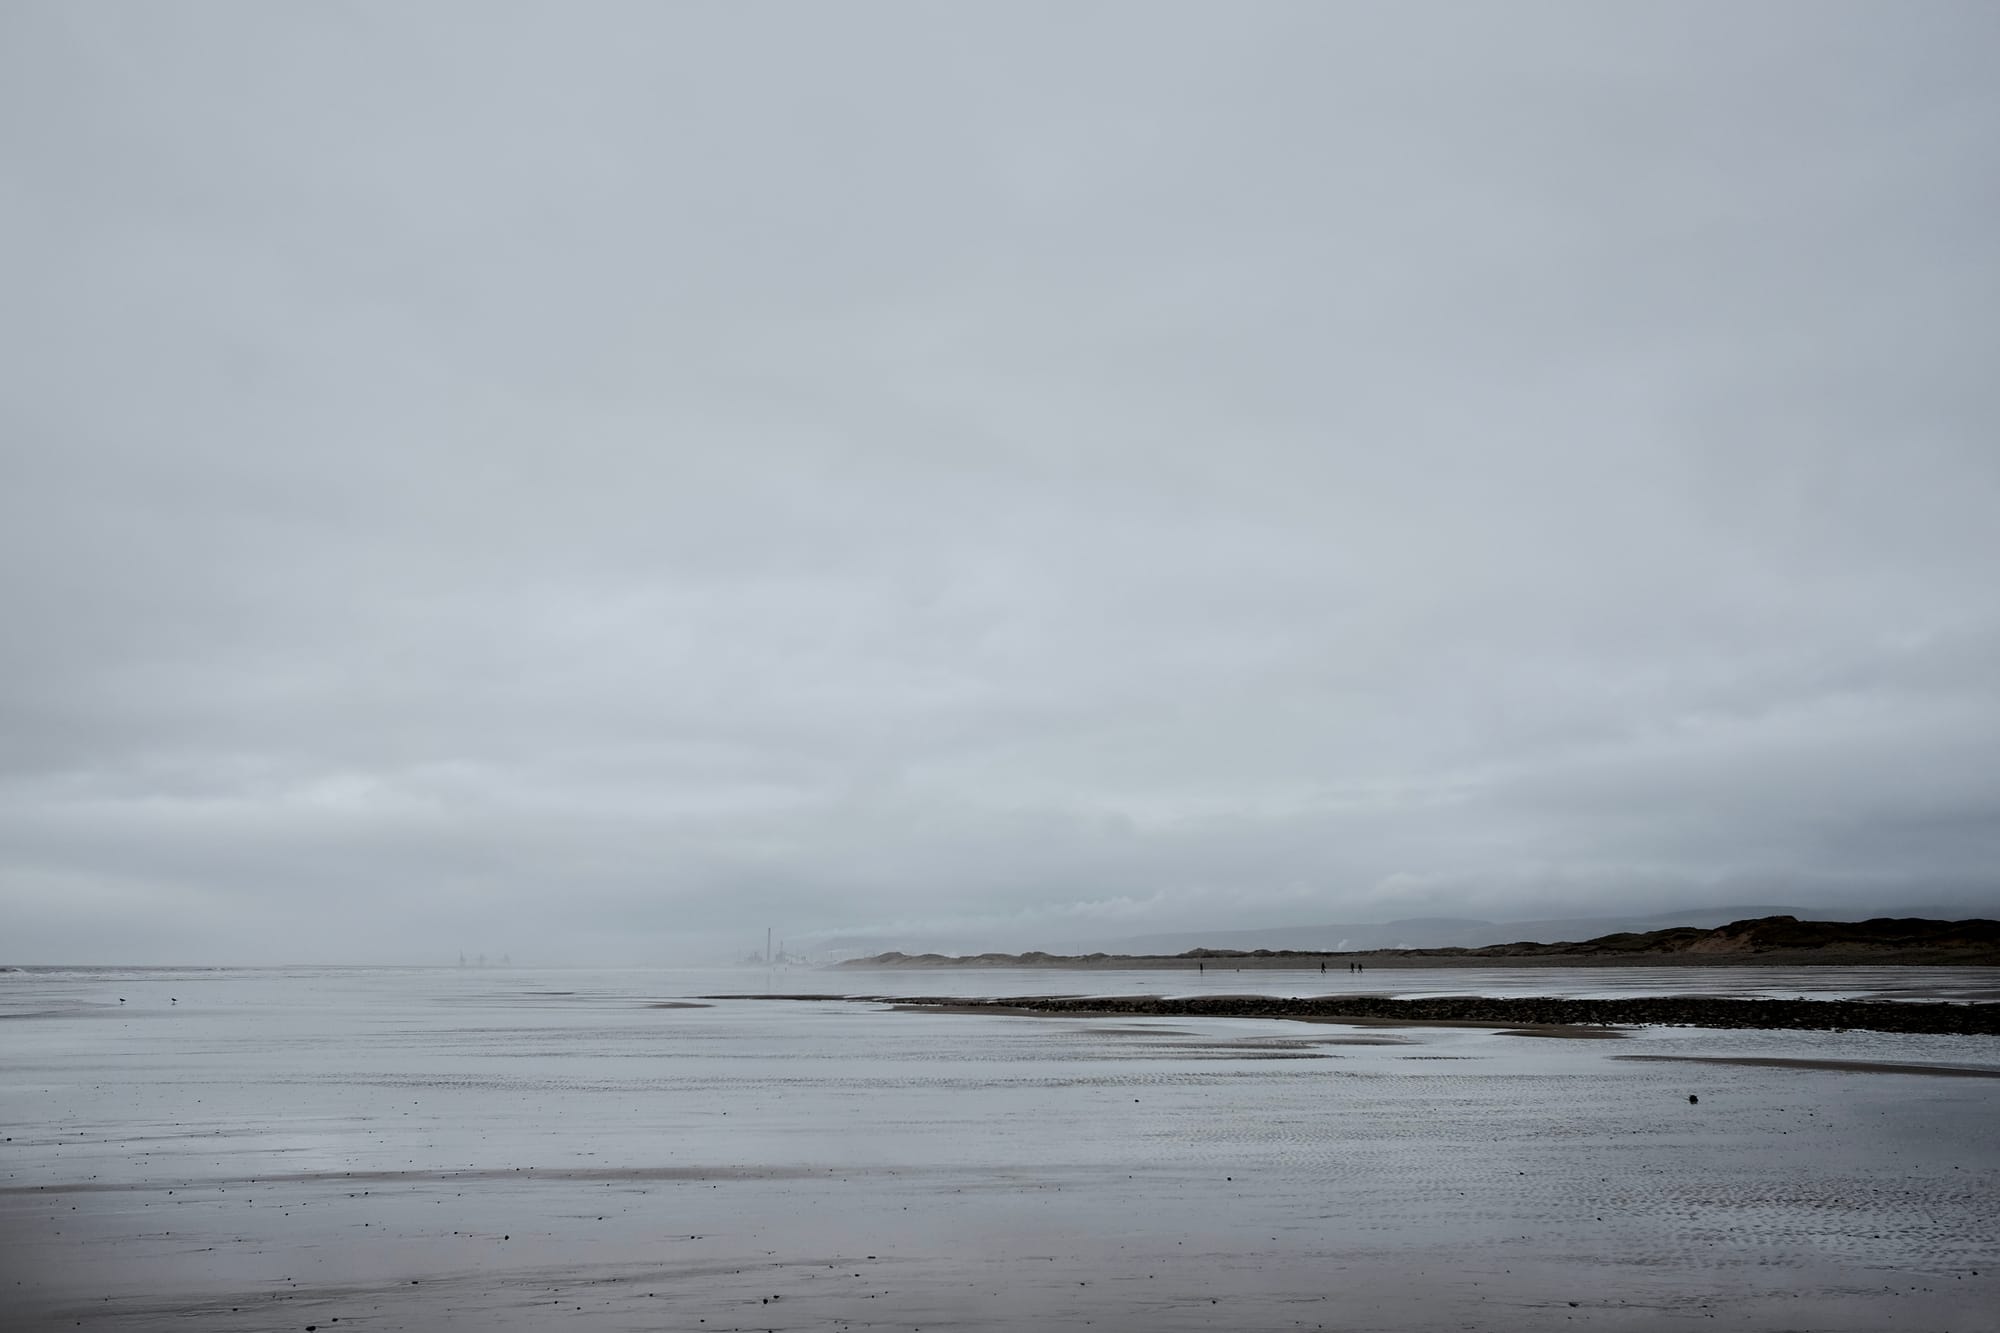 In grey light, distant figures walk on a large swathe of sandy beach covered in water, industrial chimneys in the distance.